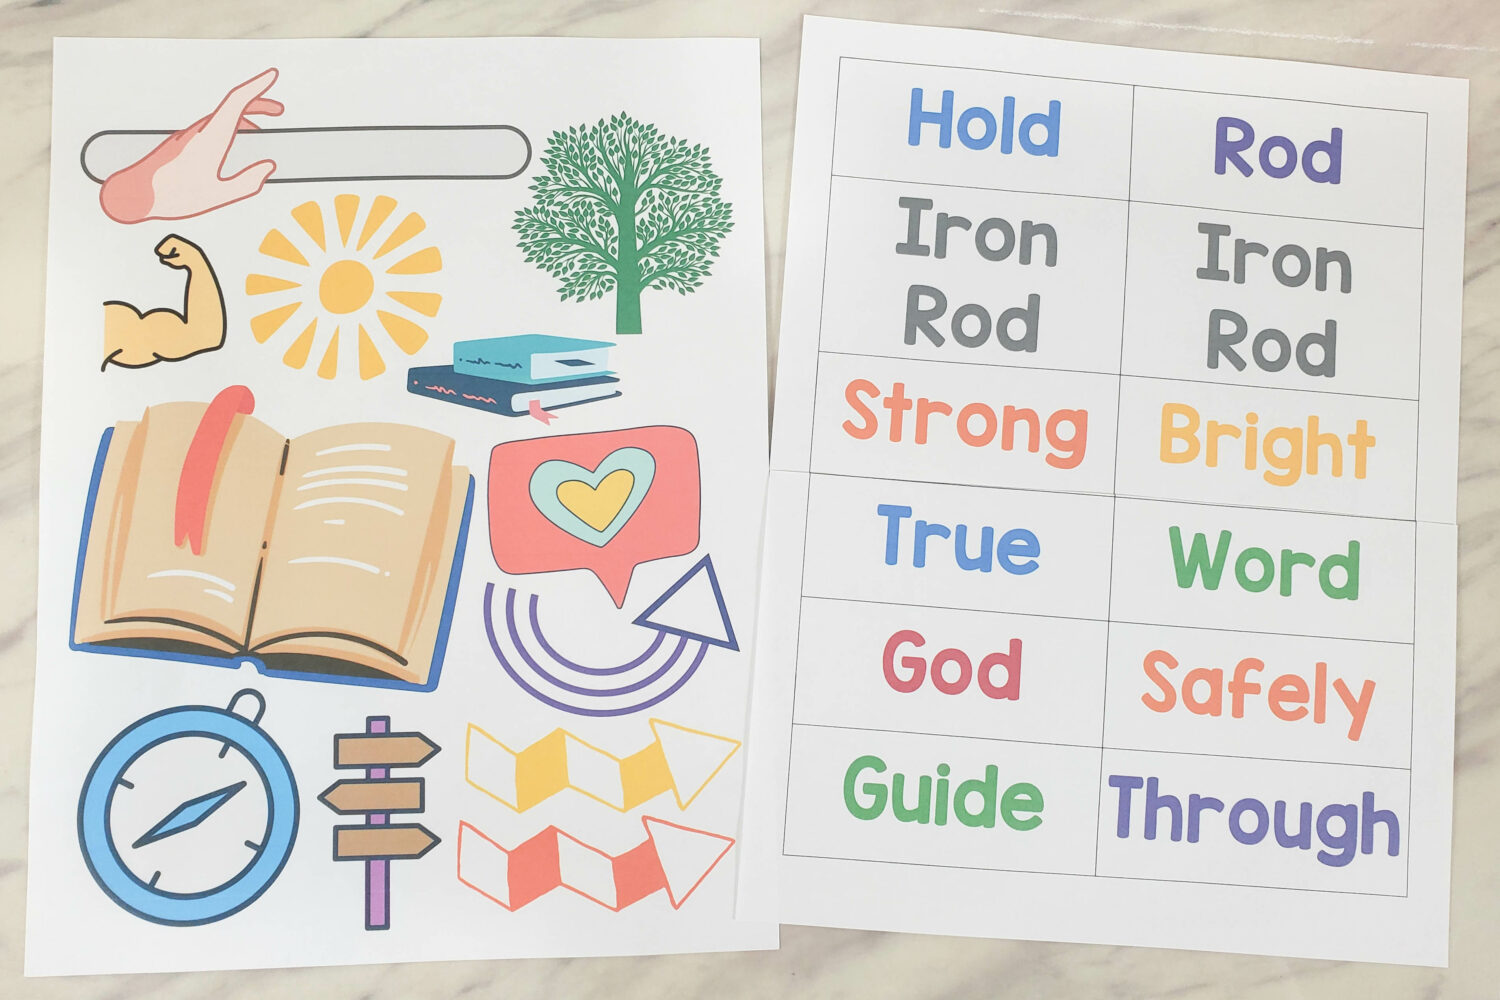 The Iron Rod Song Picture Puzzle a fun and interactive singing time activity to help teach this song for LDS Primary music leaders! Decode the picture as you find the match to the lyrics.